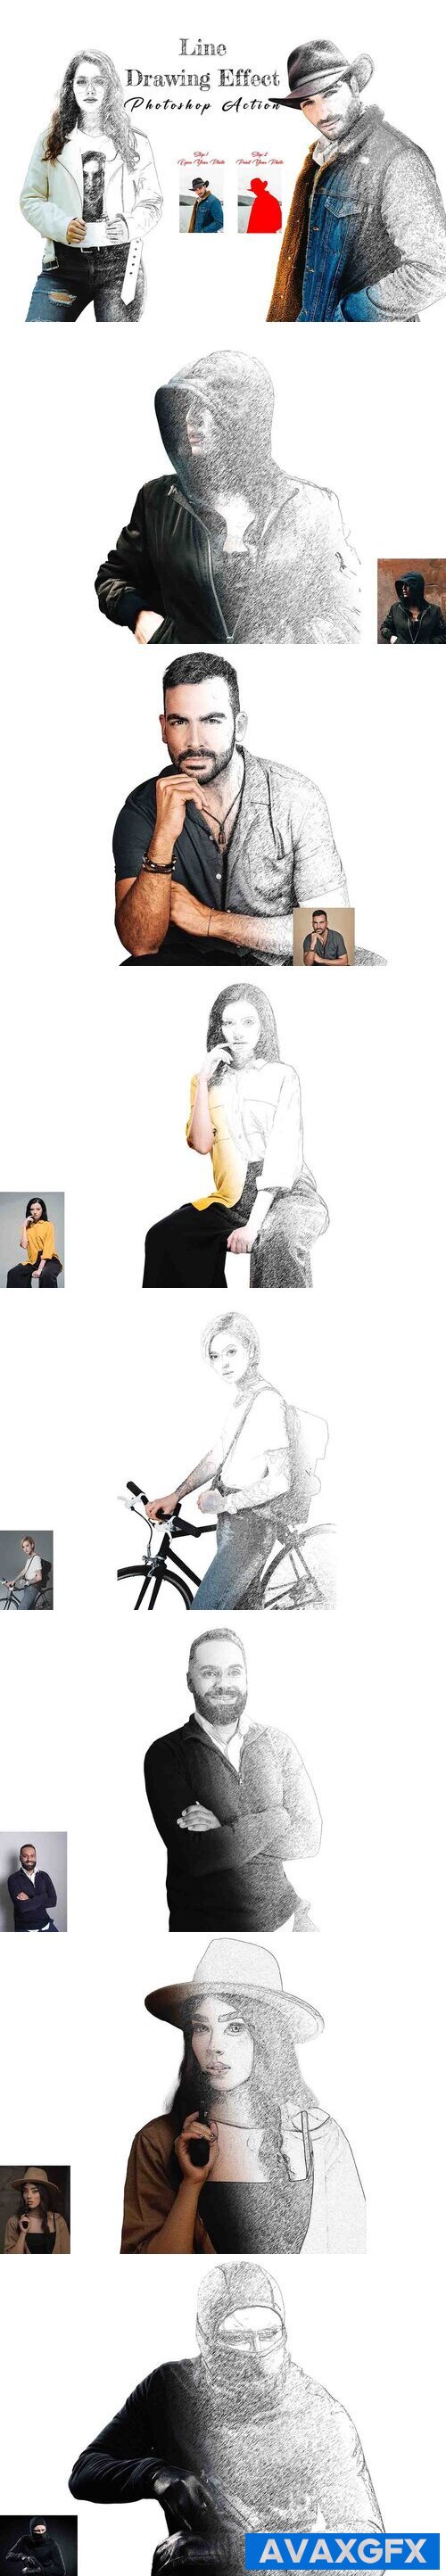 Creativemarket - Line Drawing Effect Photoshop Action 11016166